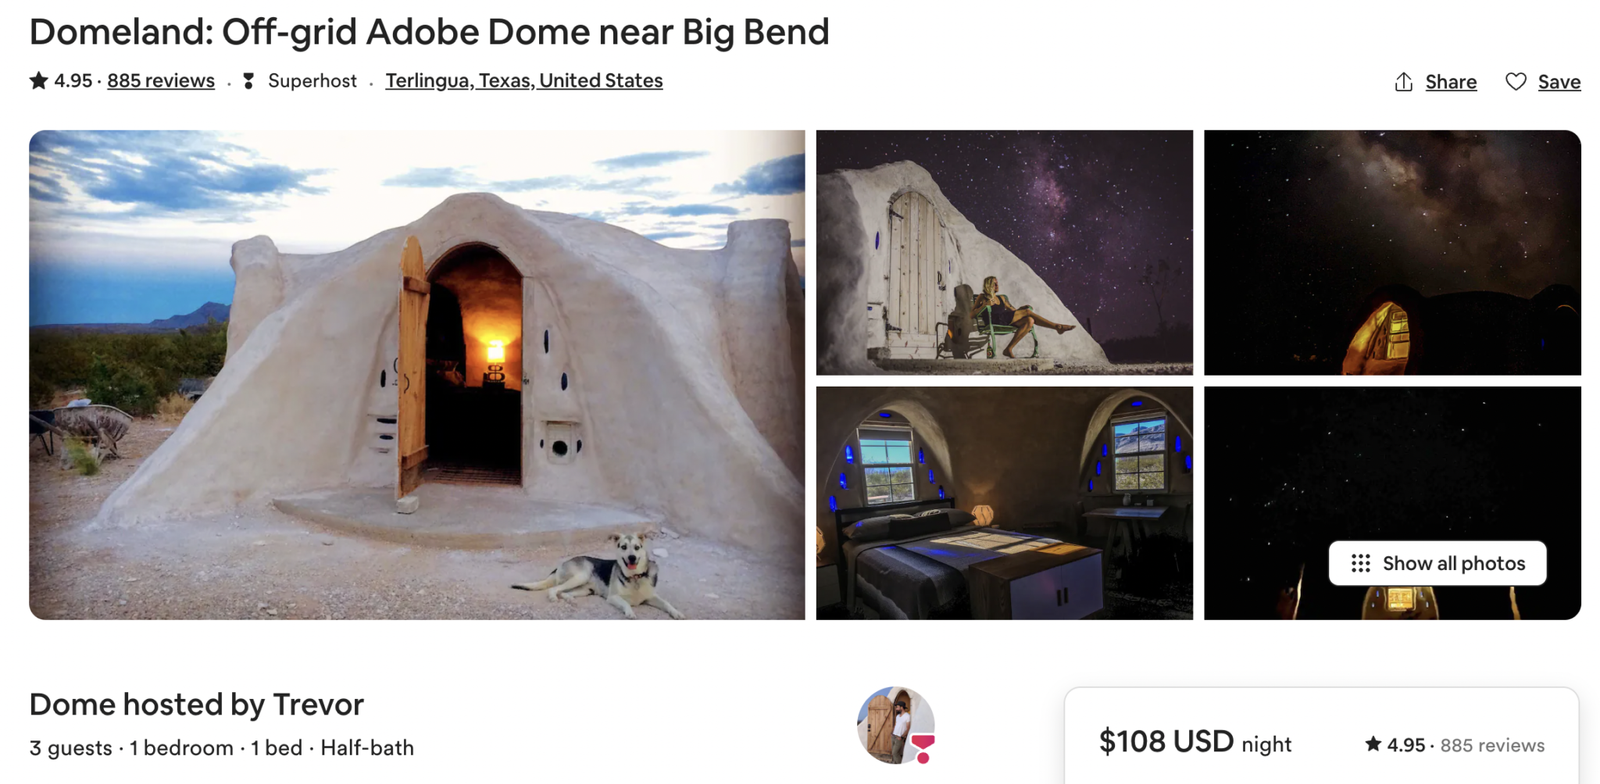 Dome Land, unique places to stay in Texas